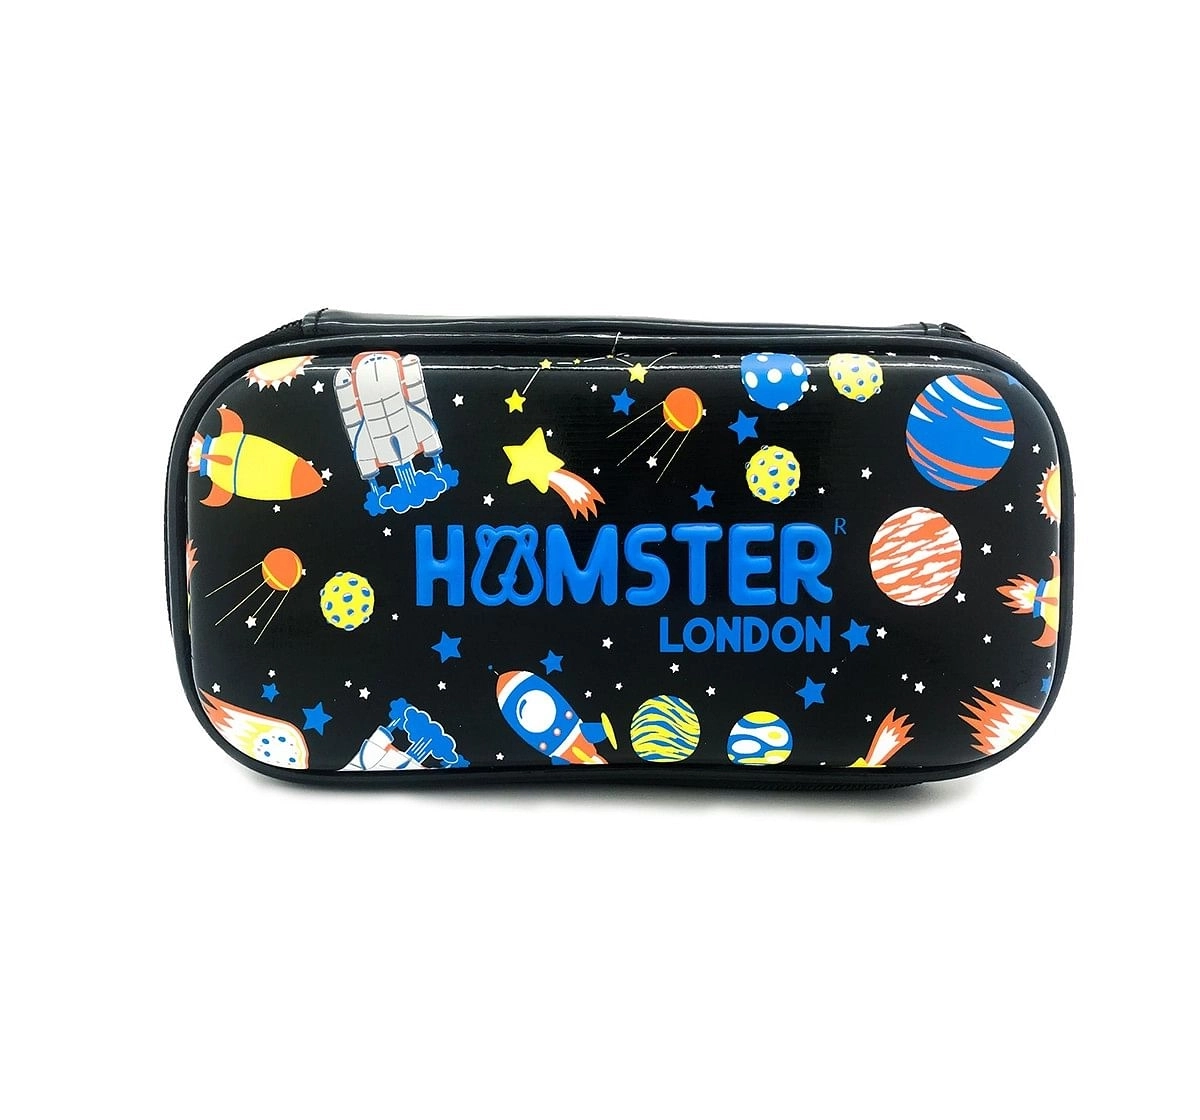 Hamster London Small Space Stationery Hardcase for Kids age 3Y+ (Black)